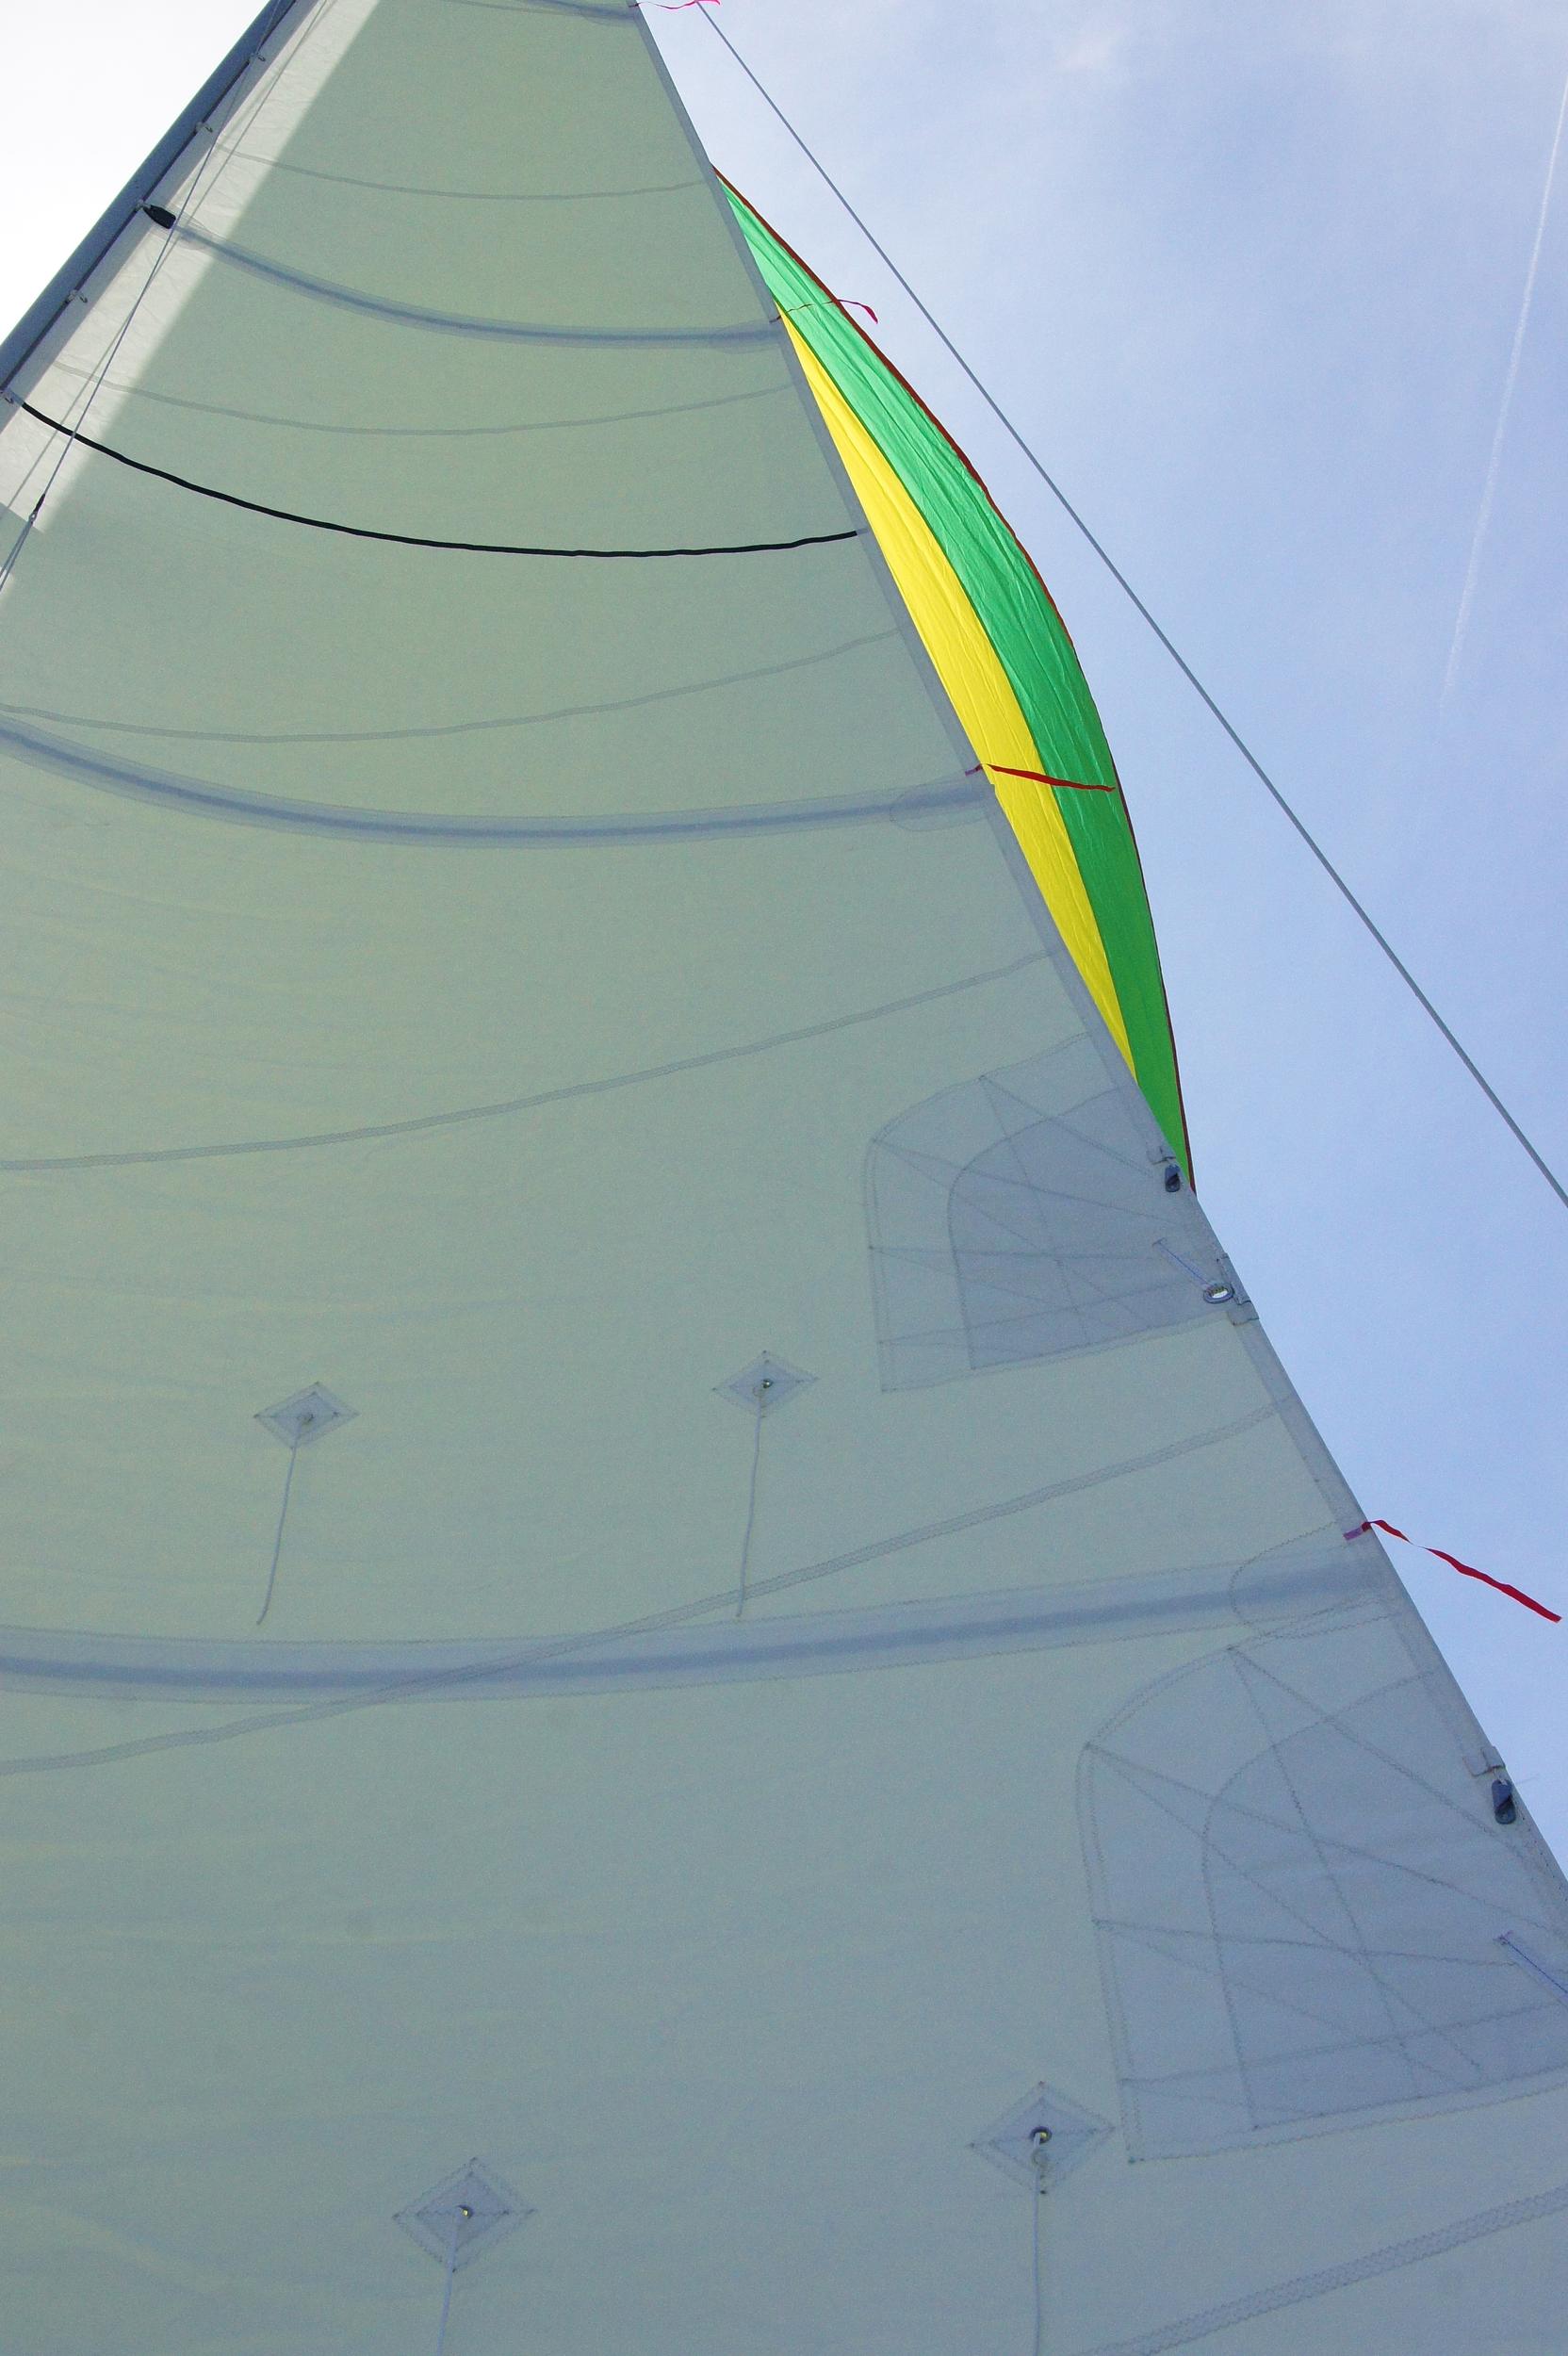 The spinnaker peaking around another sail.